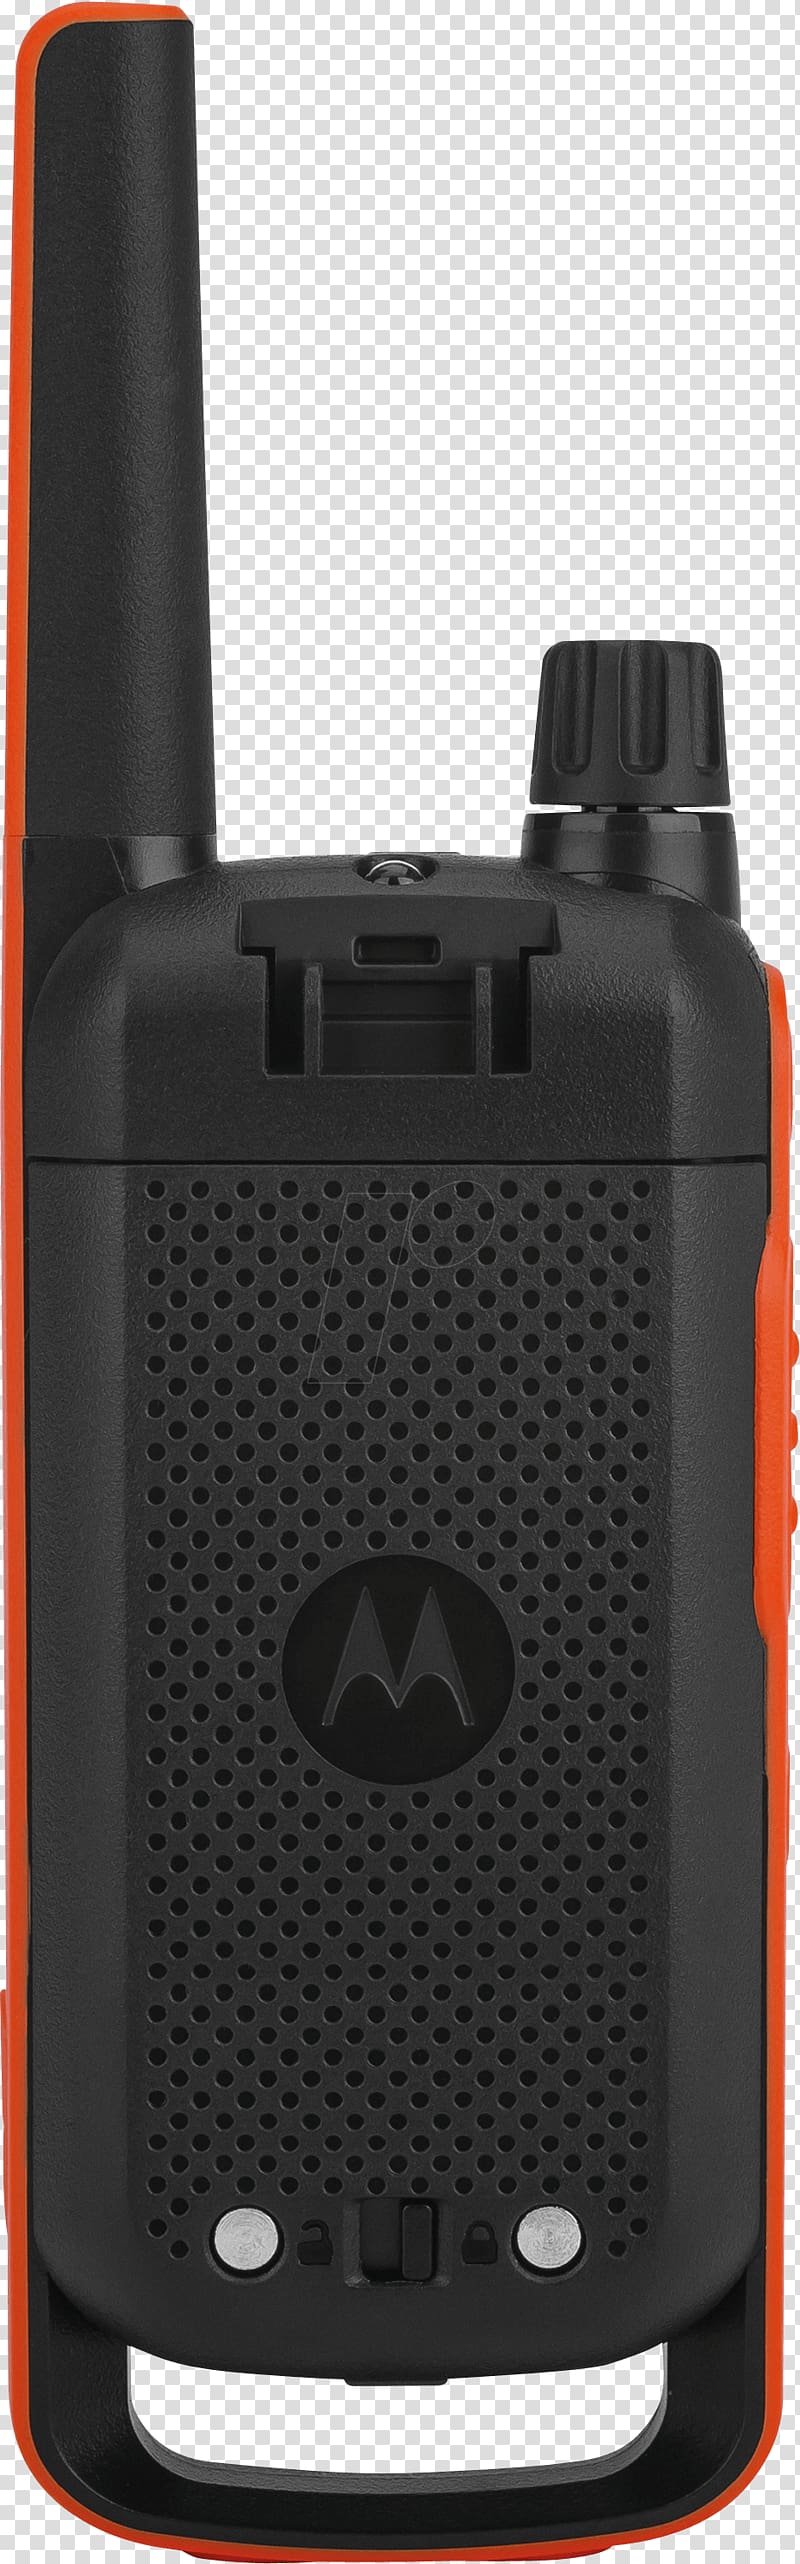 PMR446 Motorola Talkabout T82 Extreme 188069 Walkie-talkie Two-way radio Motorola TLKR T80 walkie talkie, walkie talkie transparent background PNG clipart